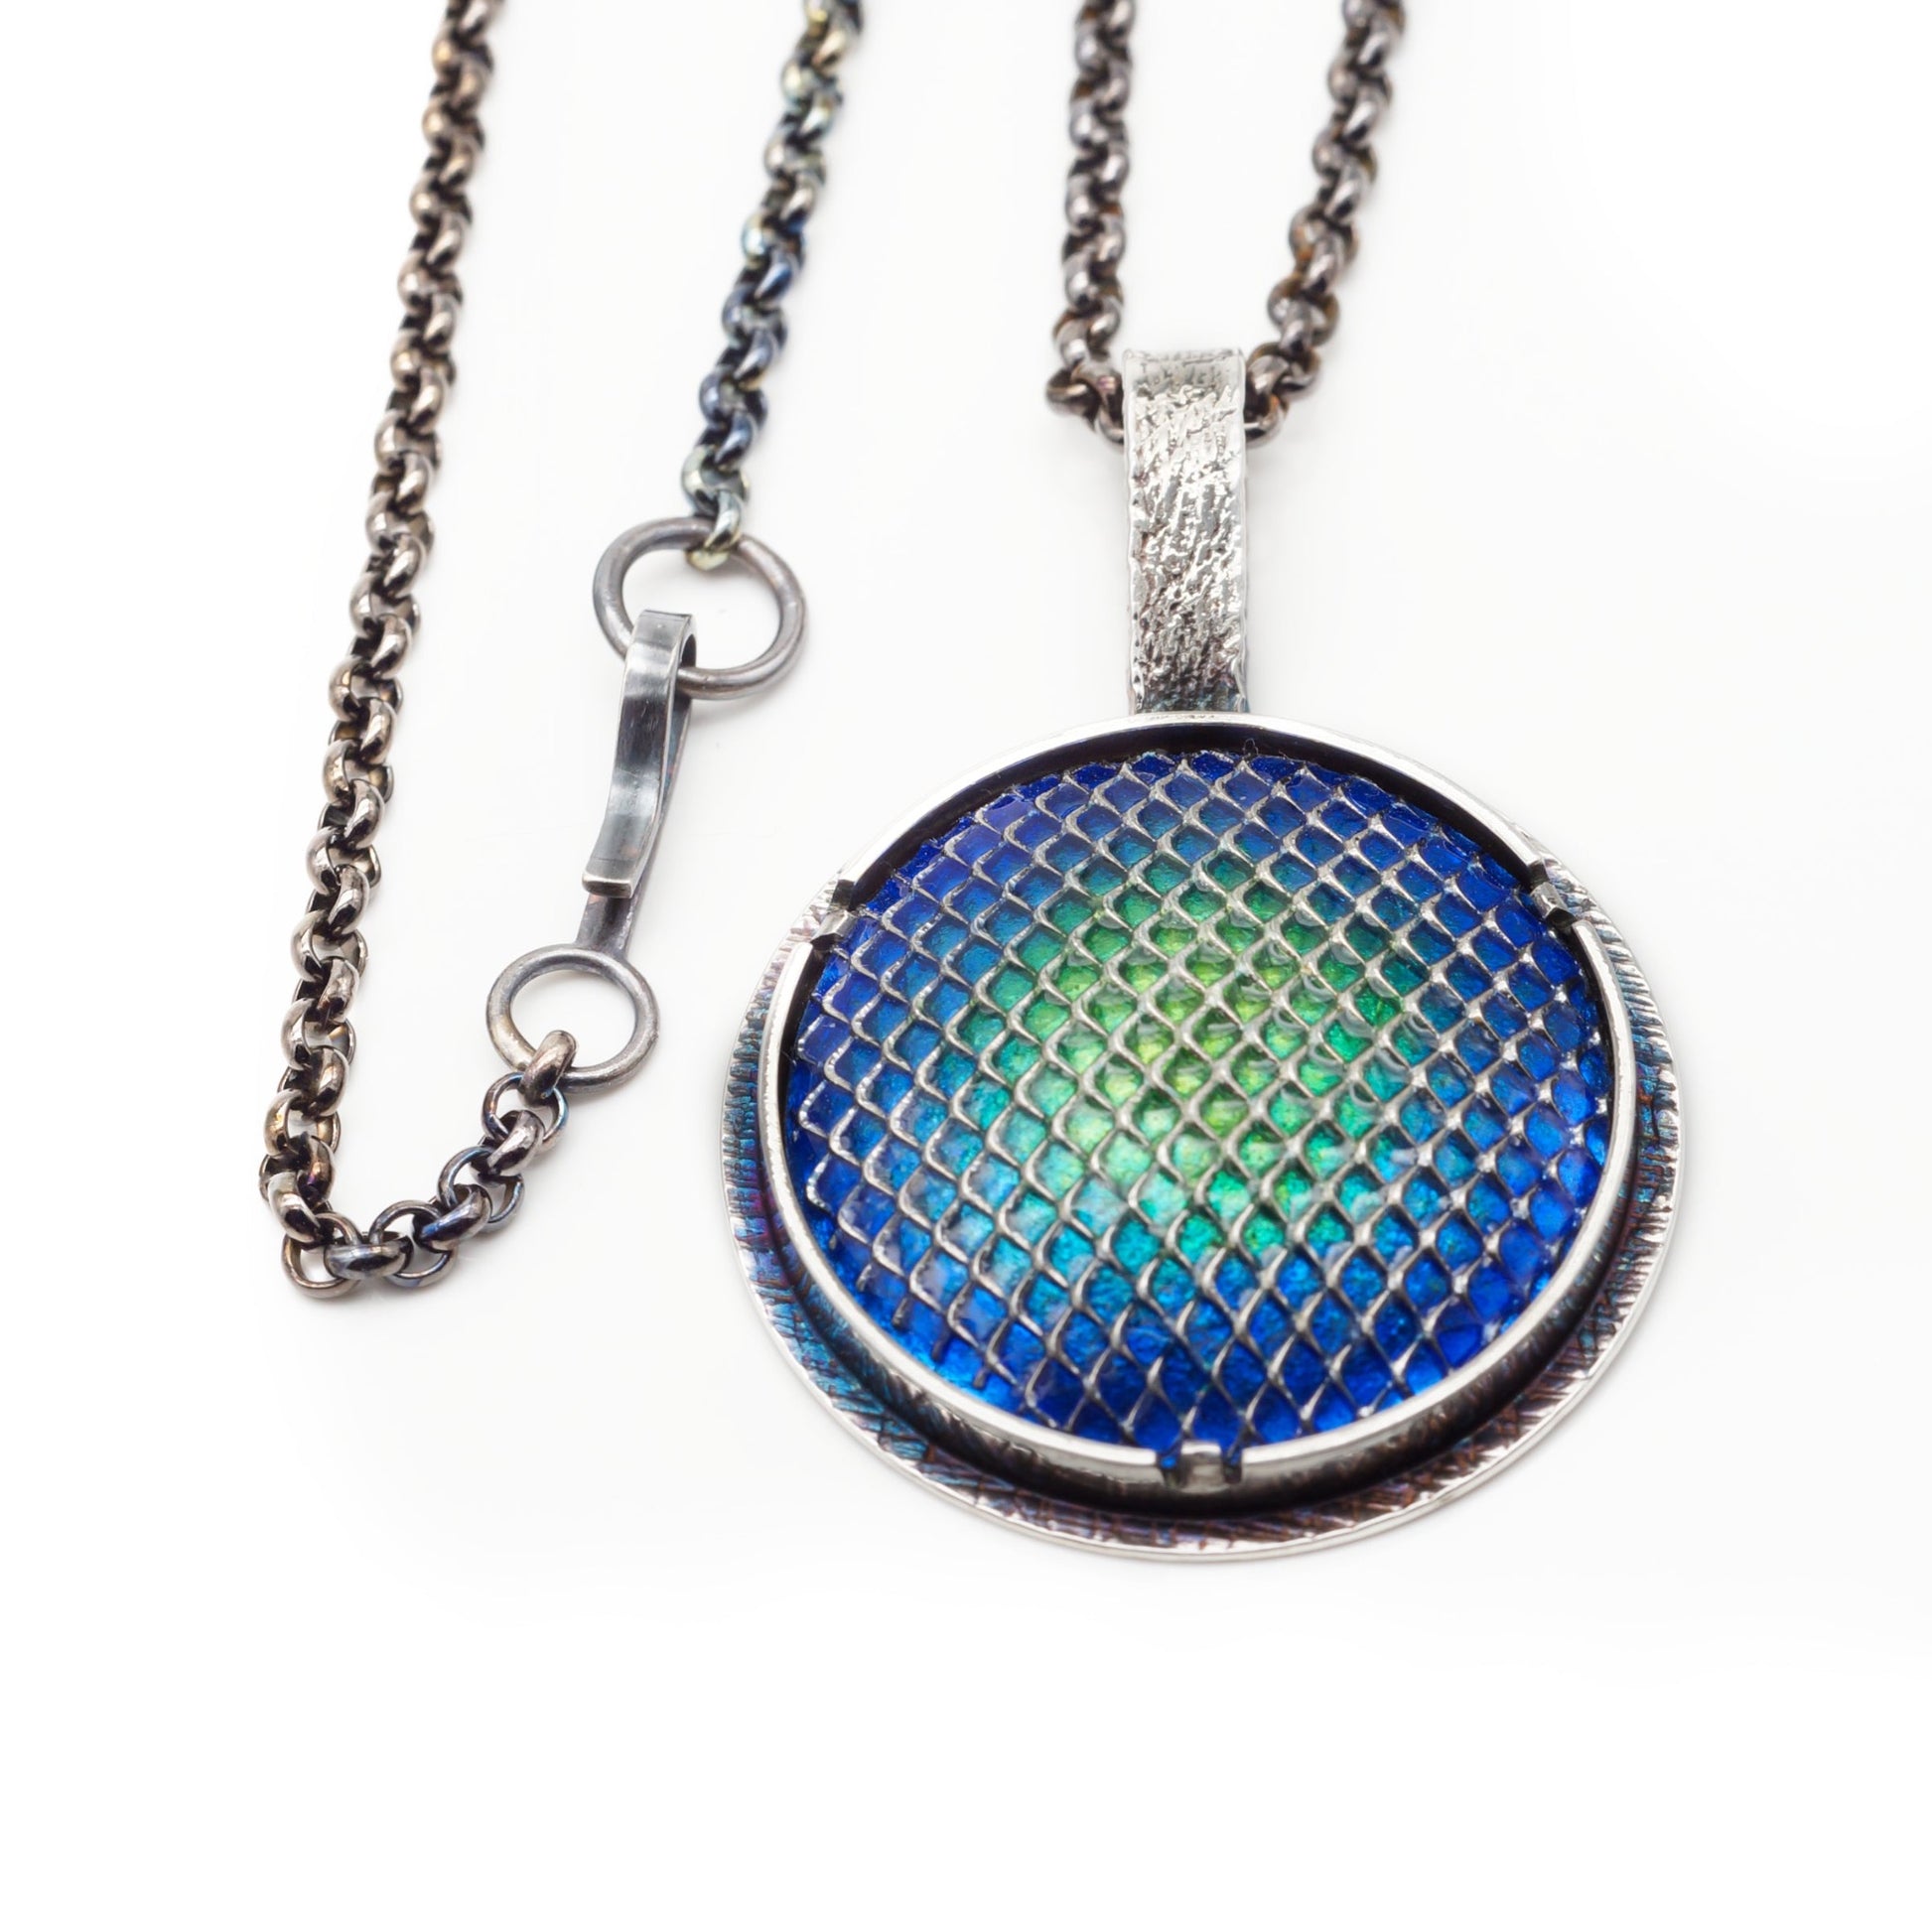 ombre blue and green fired enamel pendant with sterling silver abstract design